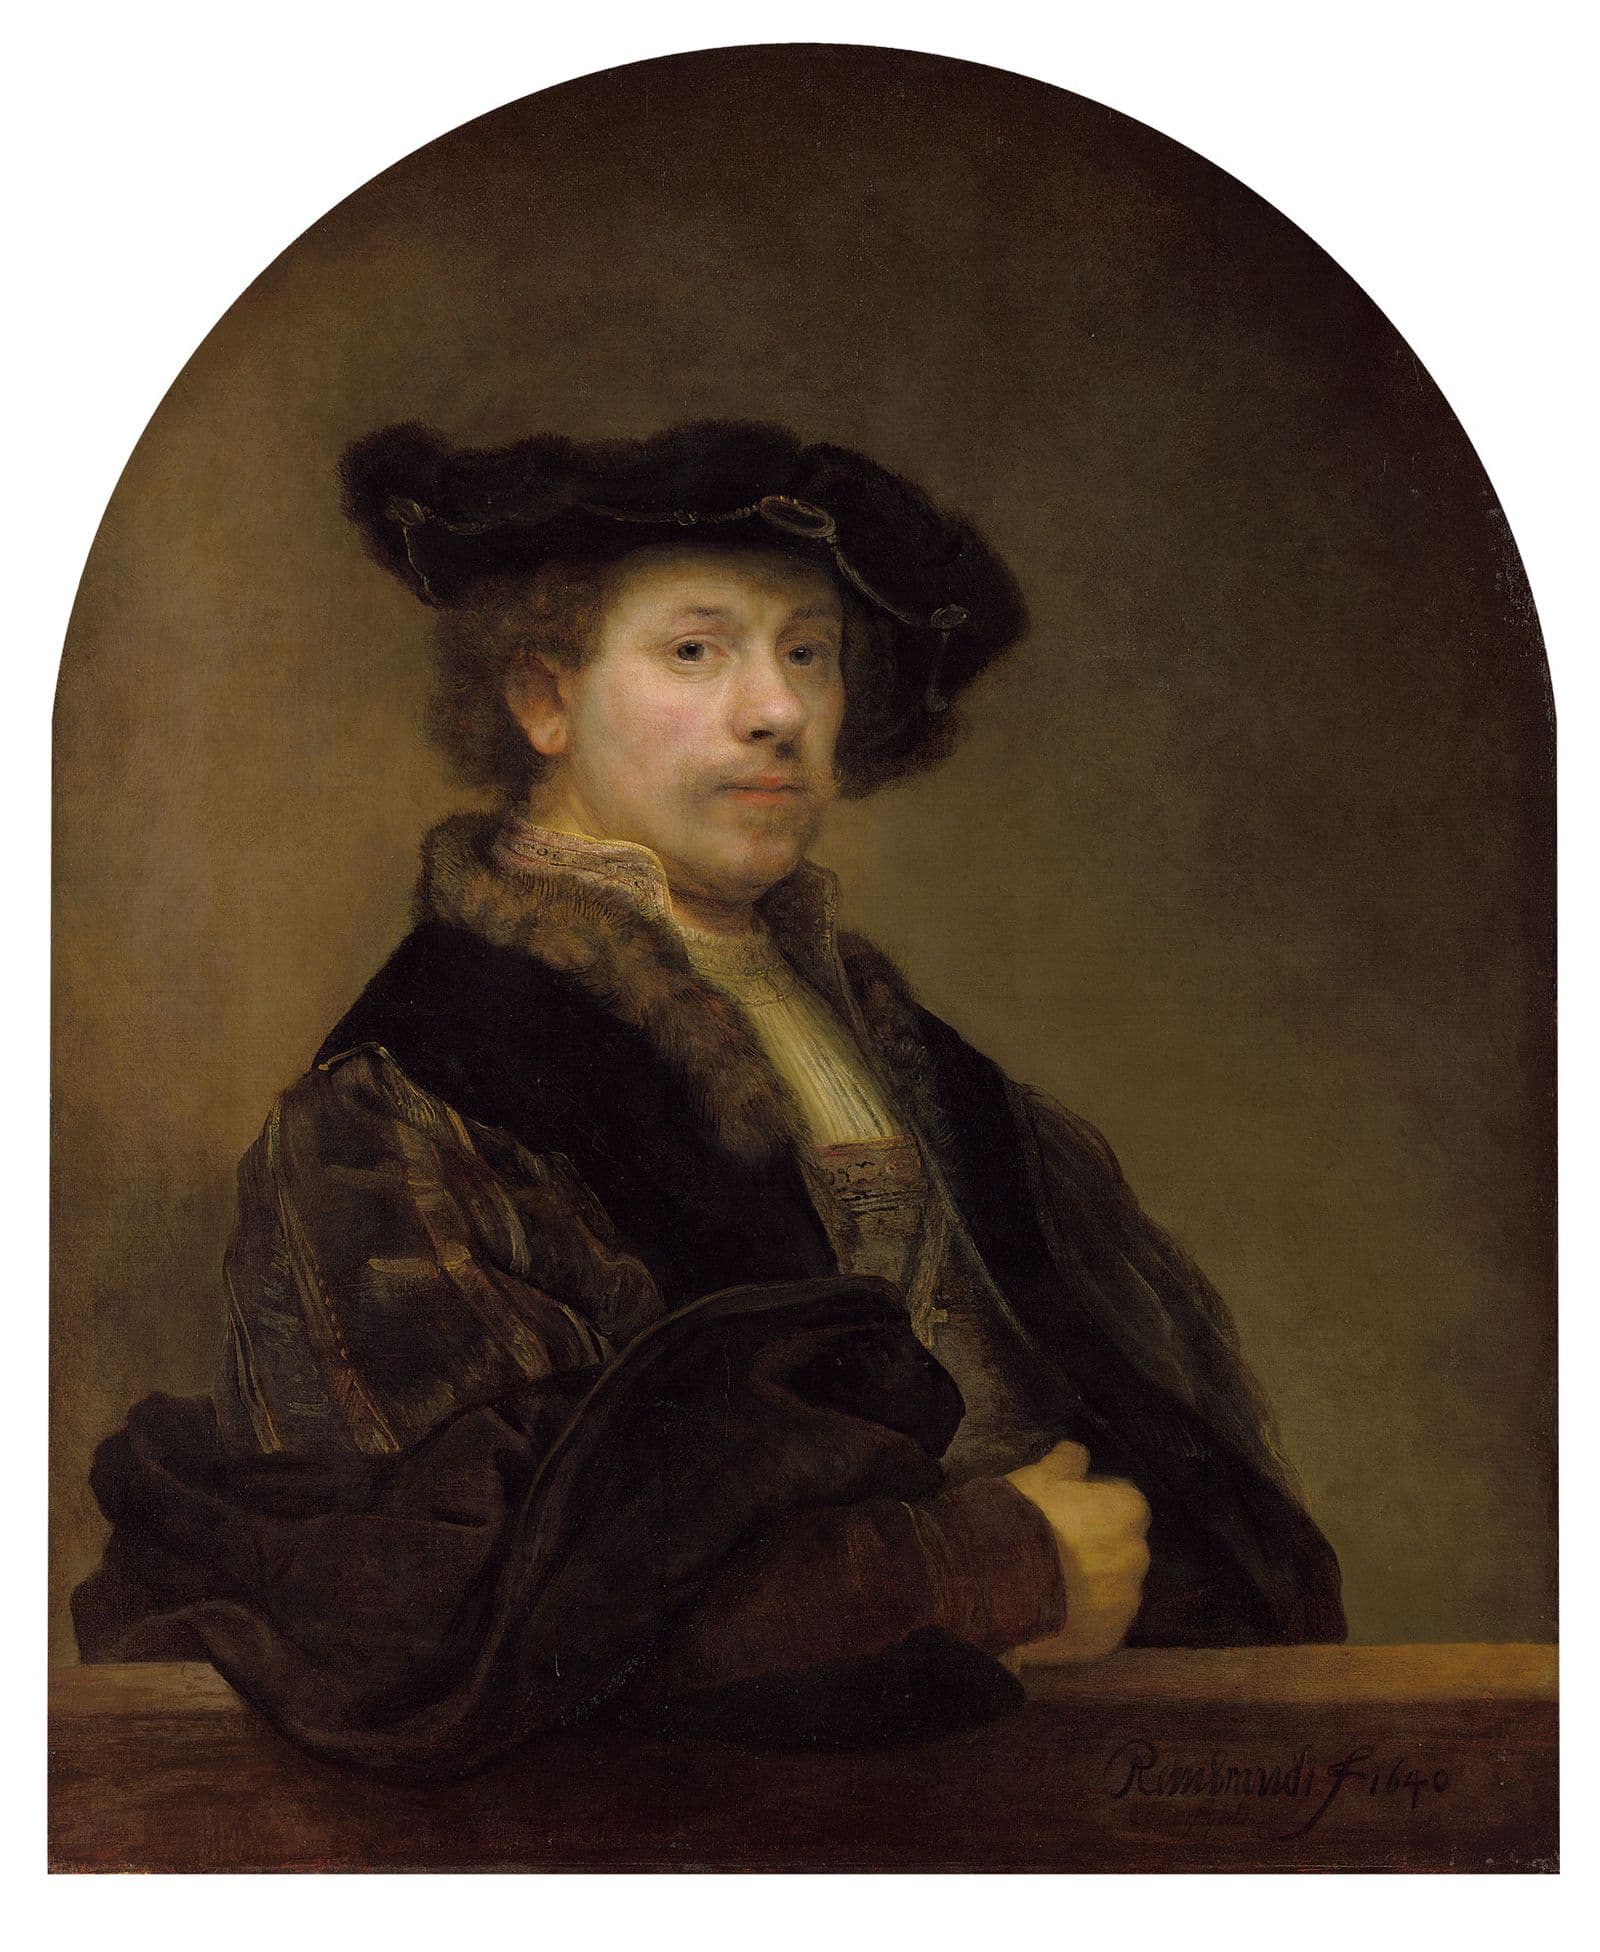 Oil paining of a seated man in a hat and fur lined coat leaning on a ledge or table.